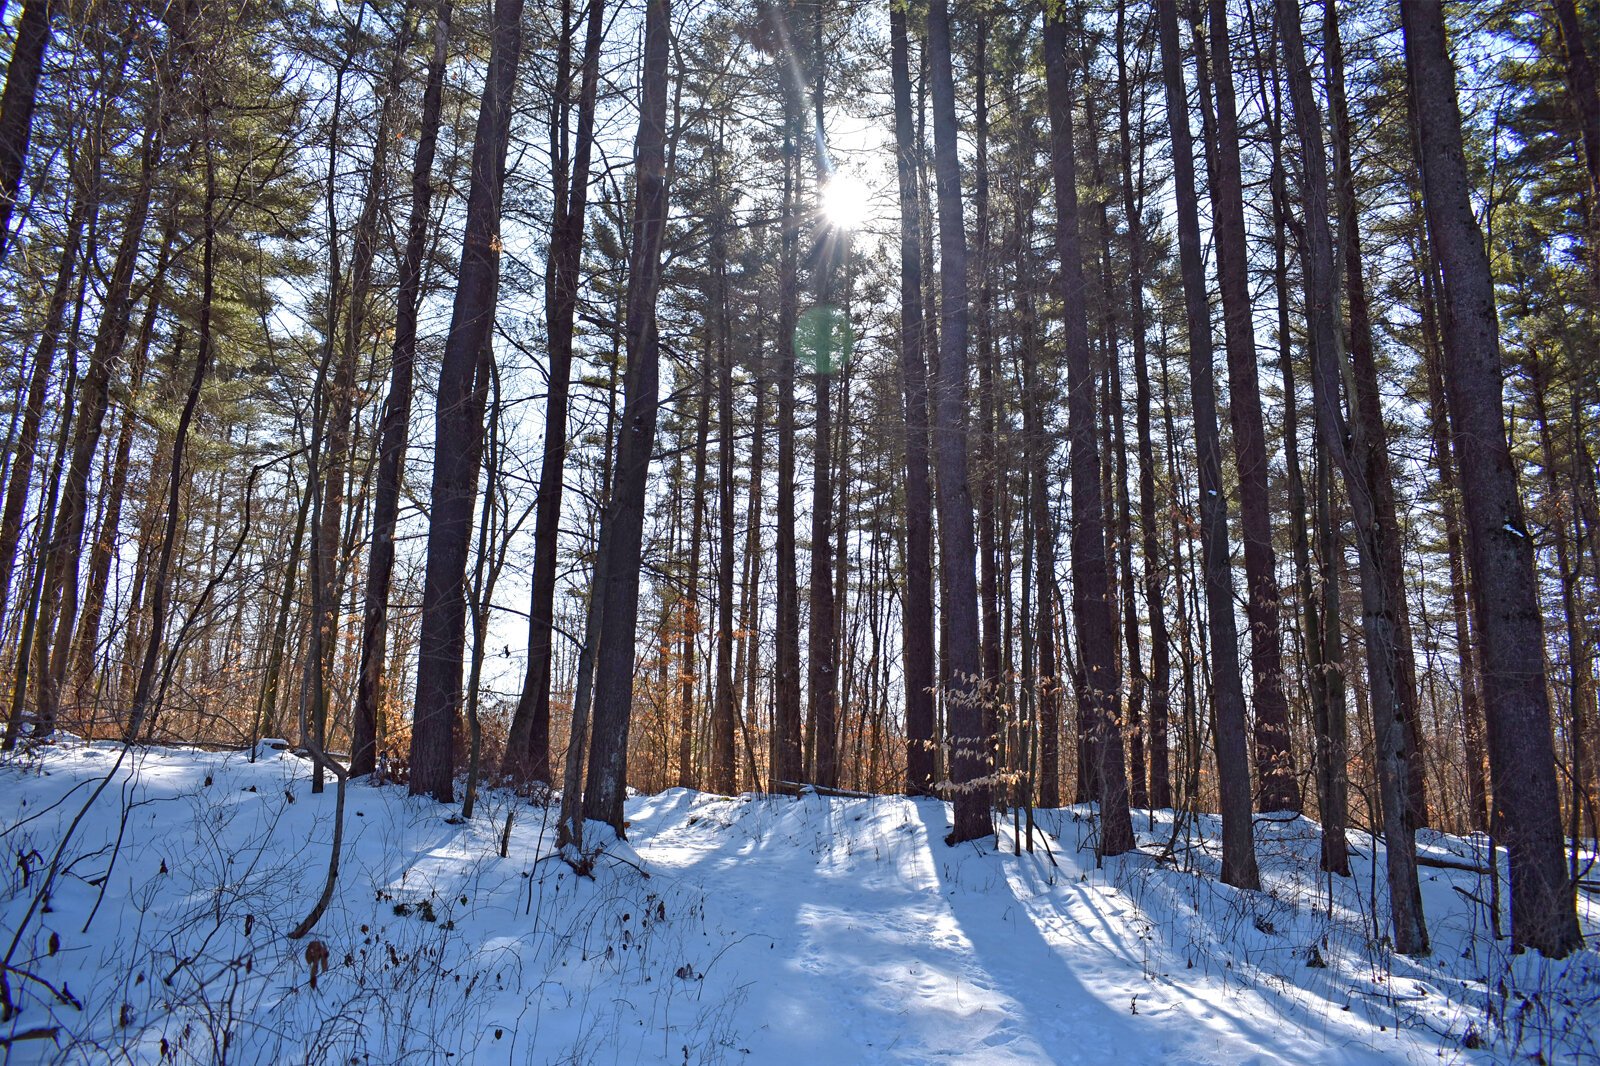 Sun shines through the trees in a wintery scene at the new Armintrout-Milbocker Nature Preserve.